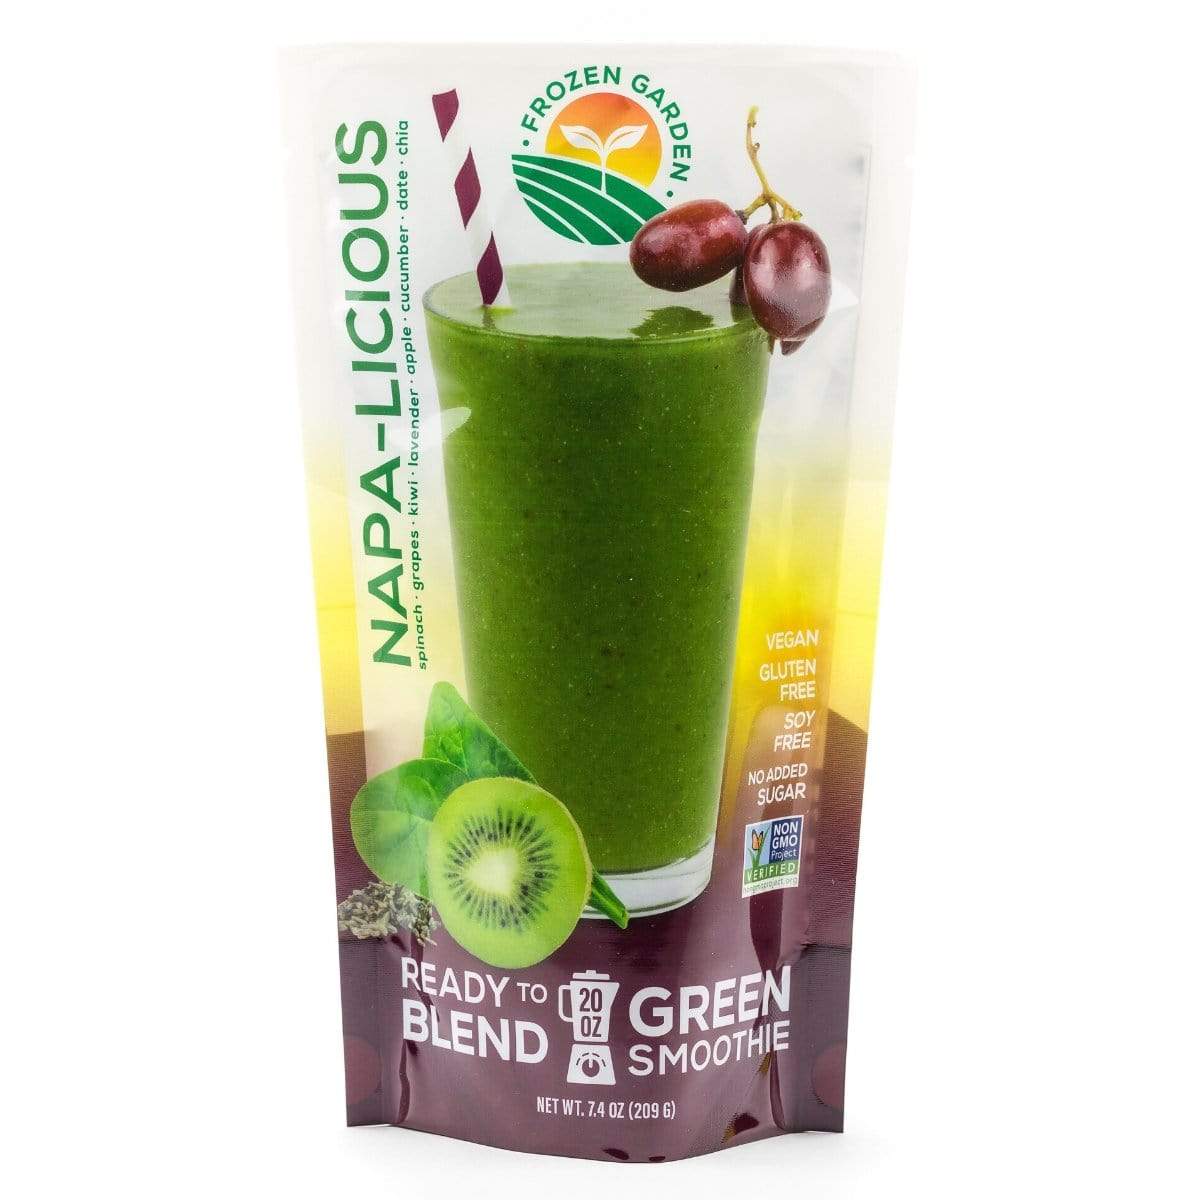 Napa-licious Green Smoothie front of pouch